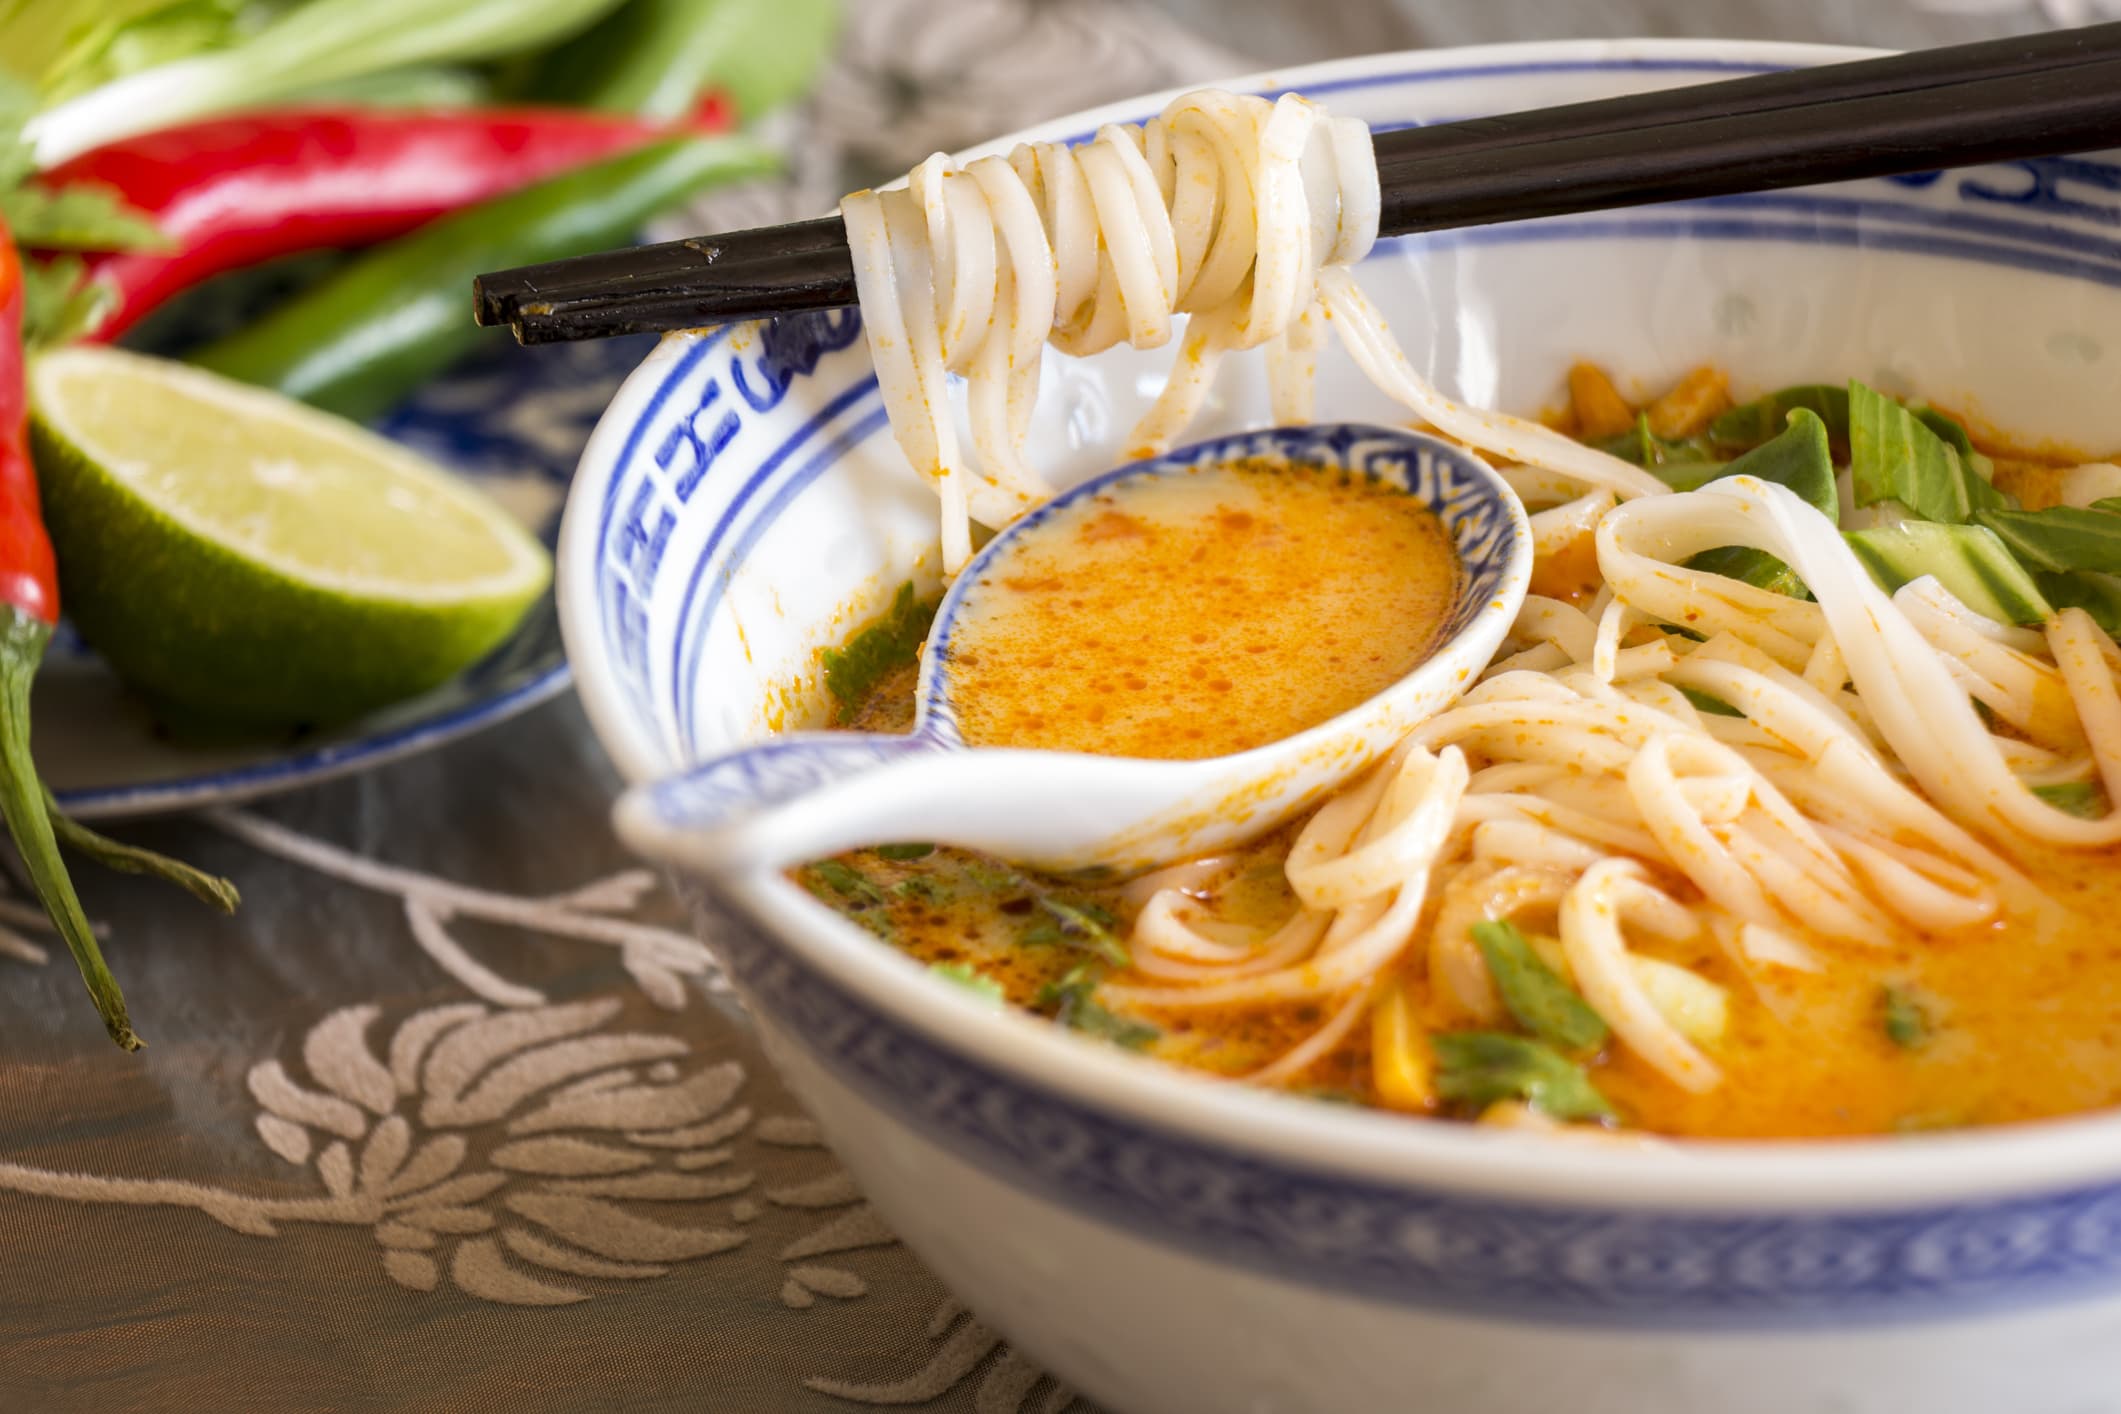 Bowl of spicy Asian soup with noodles and vegetables for a delicious appetizer served with chopsticks and surrounded by fresh ingredients